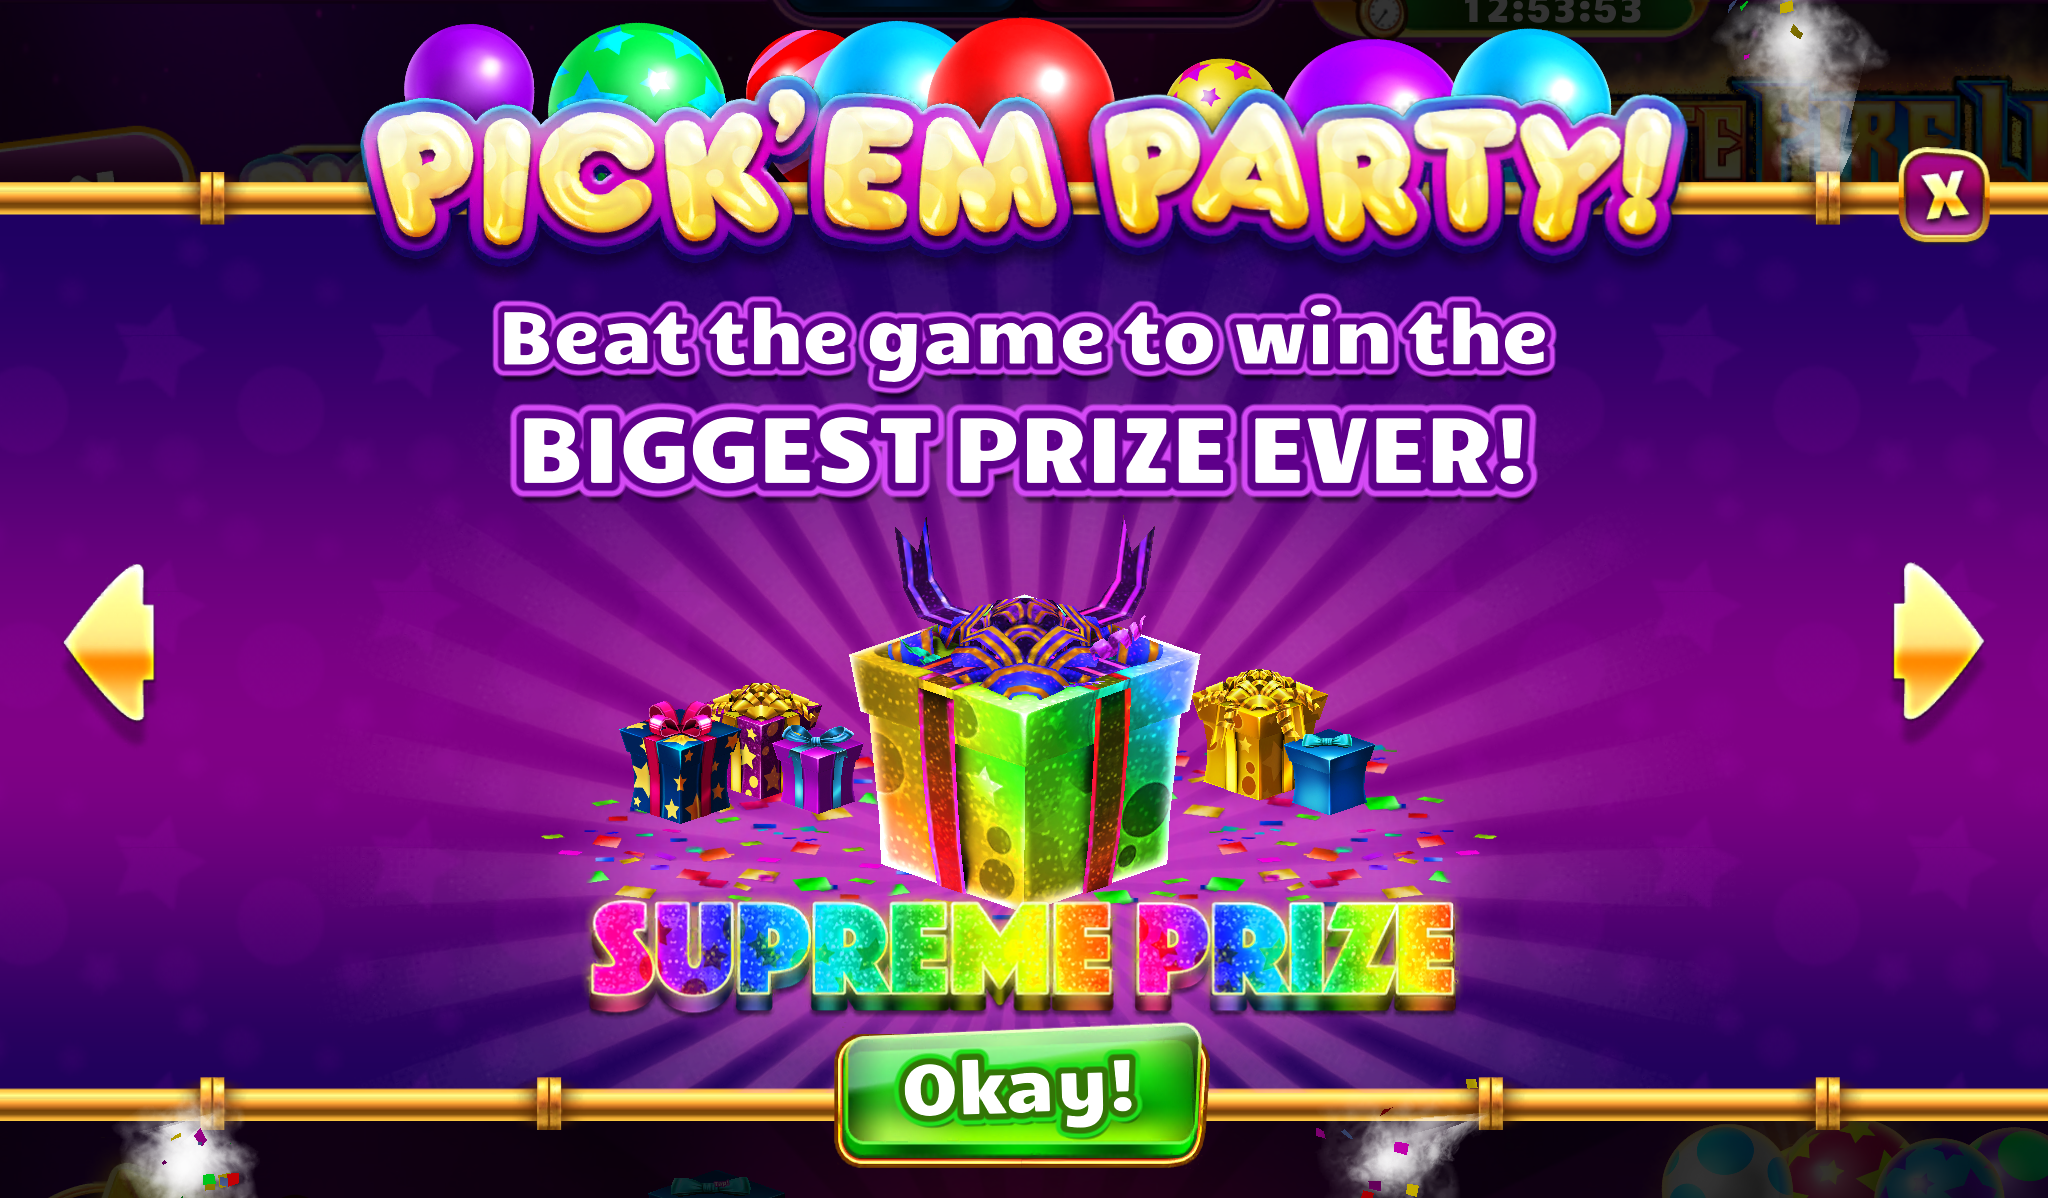 pickem-party-supremeprize.png